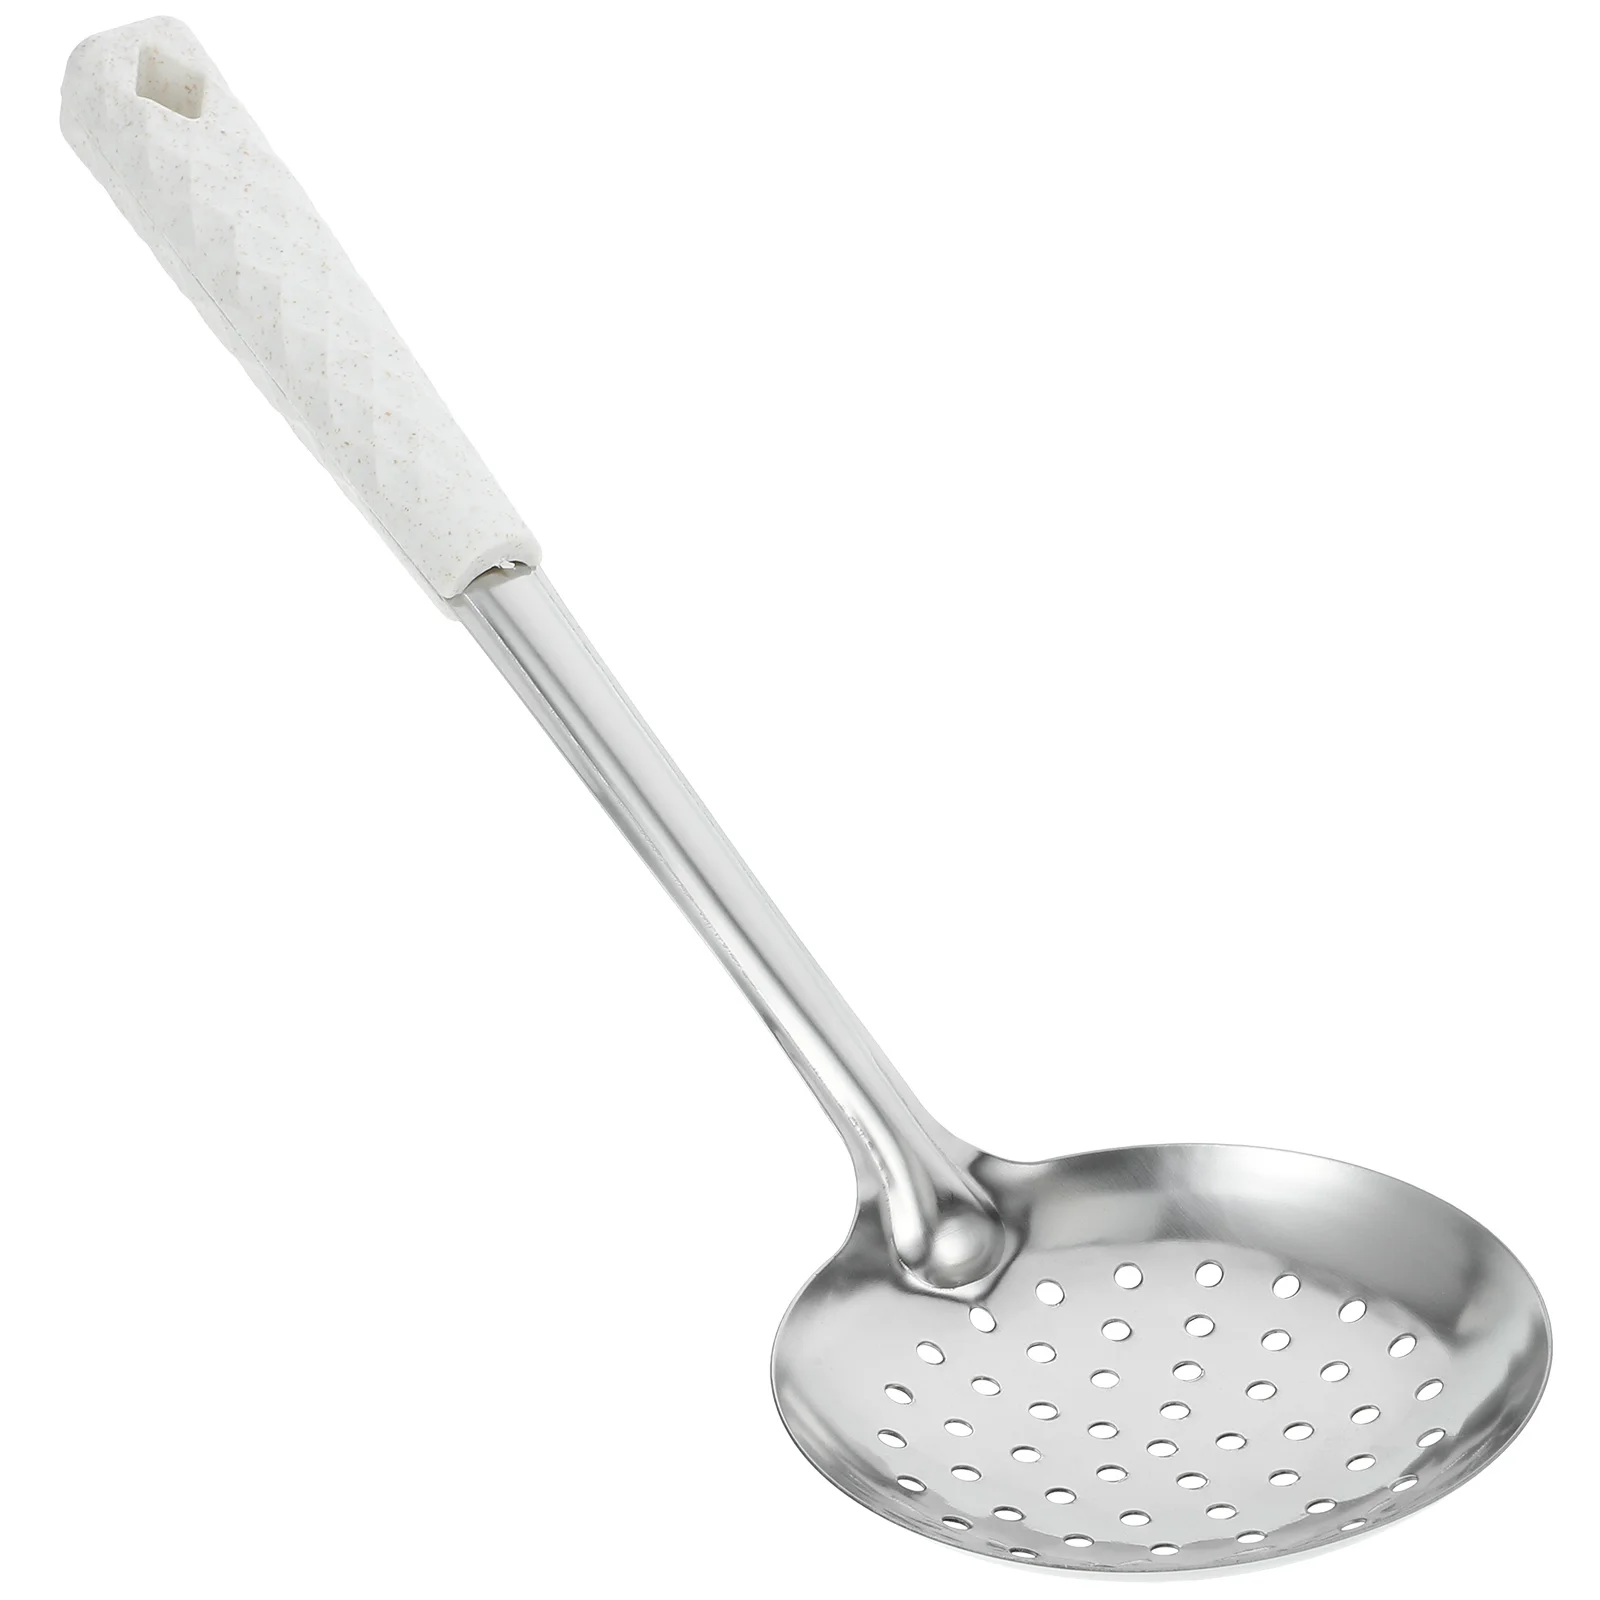 

Stainless Steel Skimmer Slotted Spoon Strainer Spoon Large Strainer Ladle with Heat Resistant Handle for Cooking Draining Frying